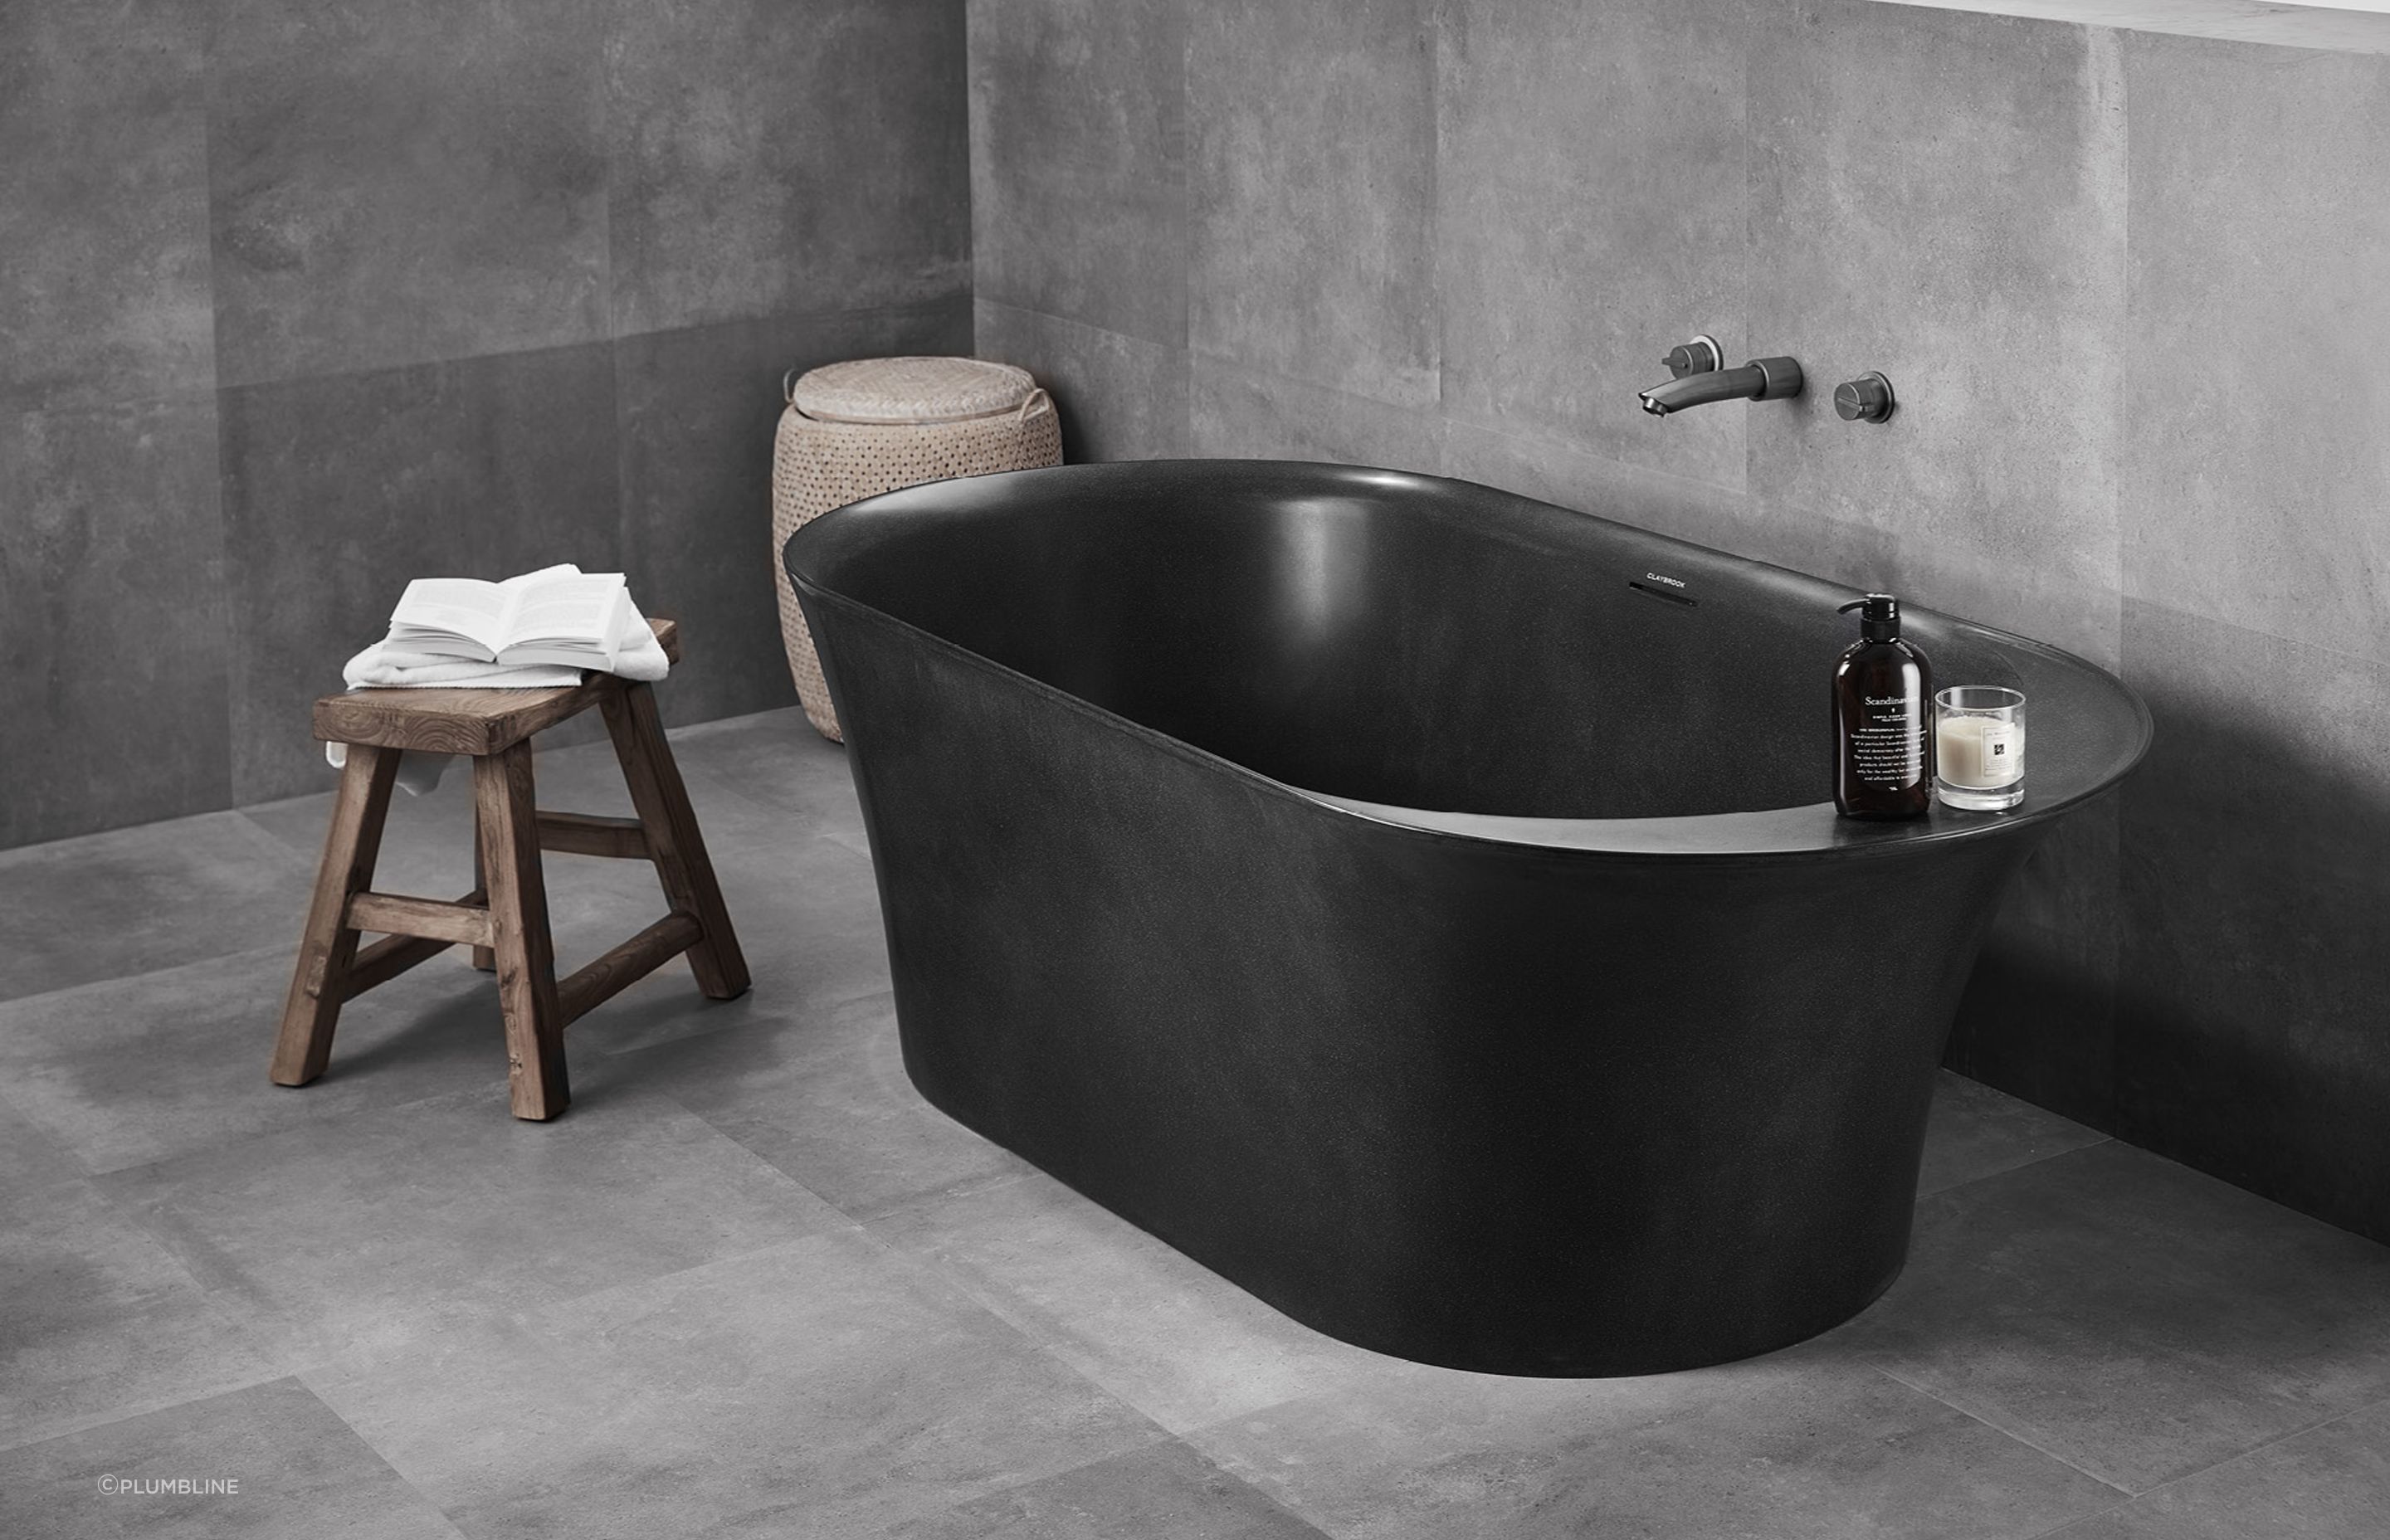 The Opus freestanding bath is a recycled-marble work of art.